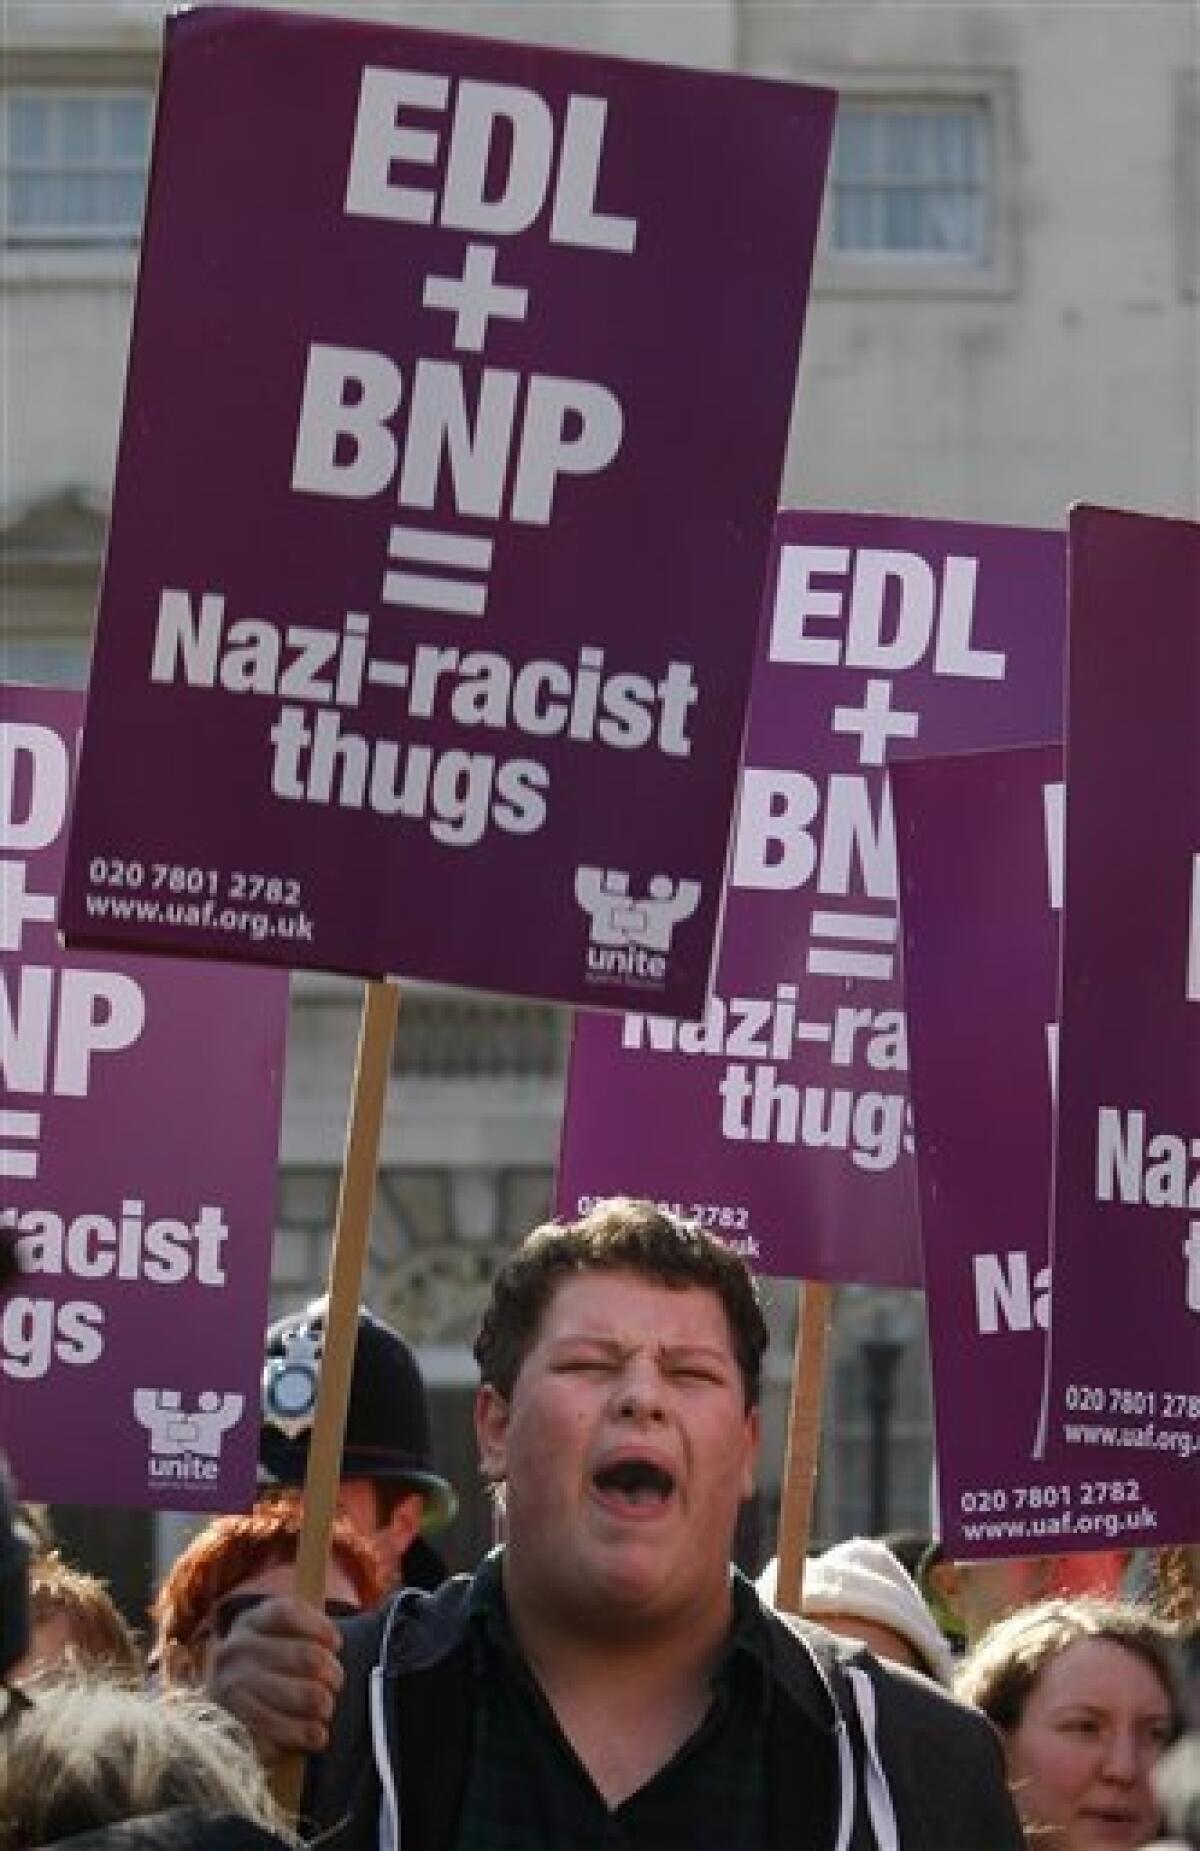 A protestor demonstrates against the visit to Britain of controversial Dutch politician Geert Wilders who attended a press conference in London, Friday, March 5, 2010. (AP Photo/Kirsty Wigglesworth)